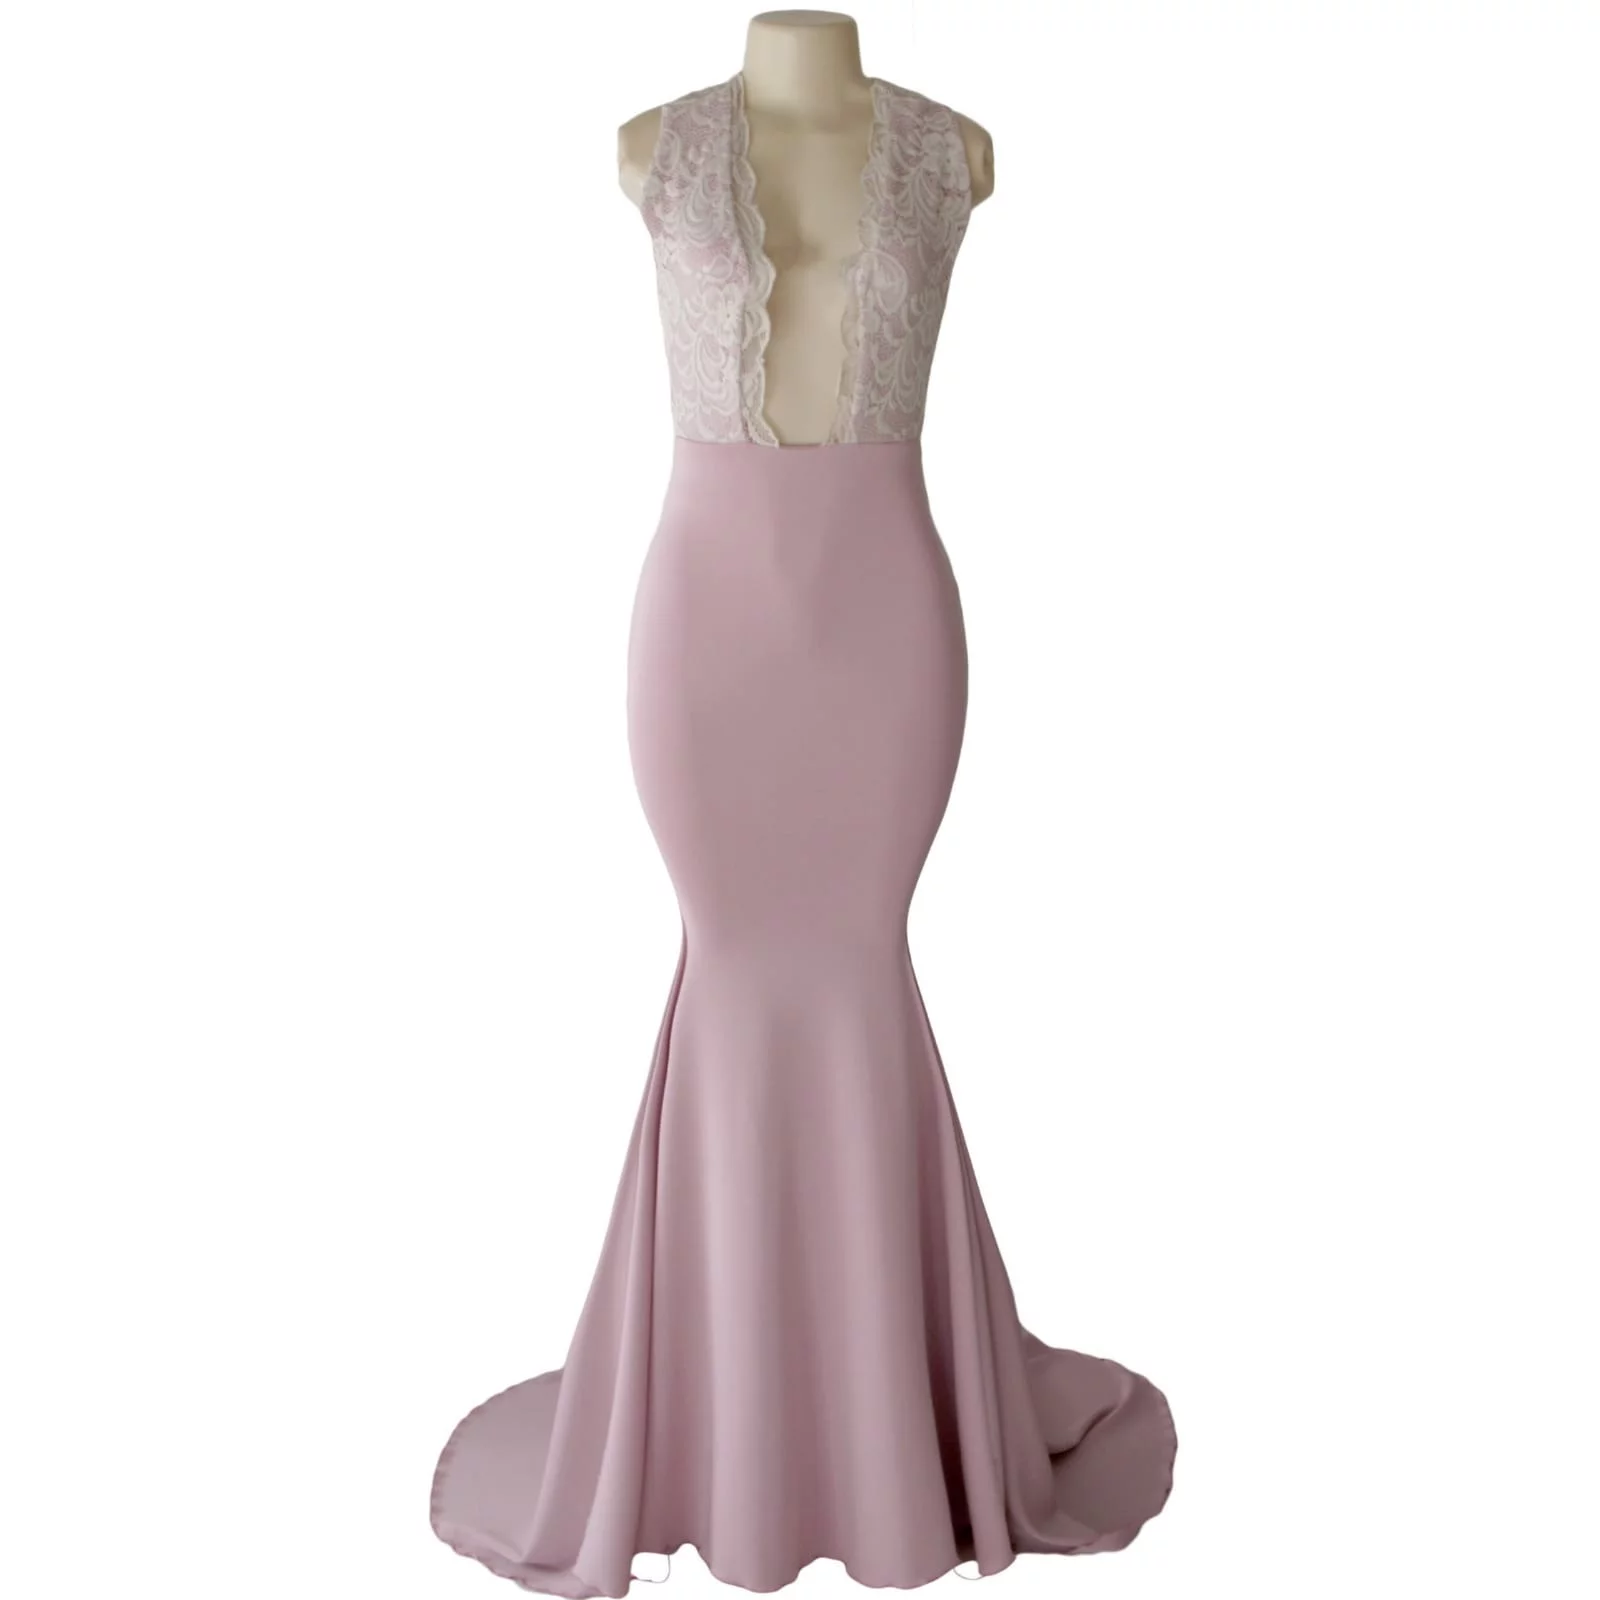 Dirty pink and cream soft mermaid prom dress 6 dirty pink and cream plunging neckline soft mermaid matric farewell dress with an open back and crossed lace back straps with a train.